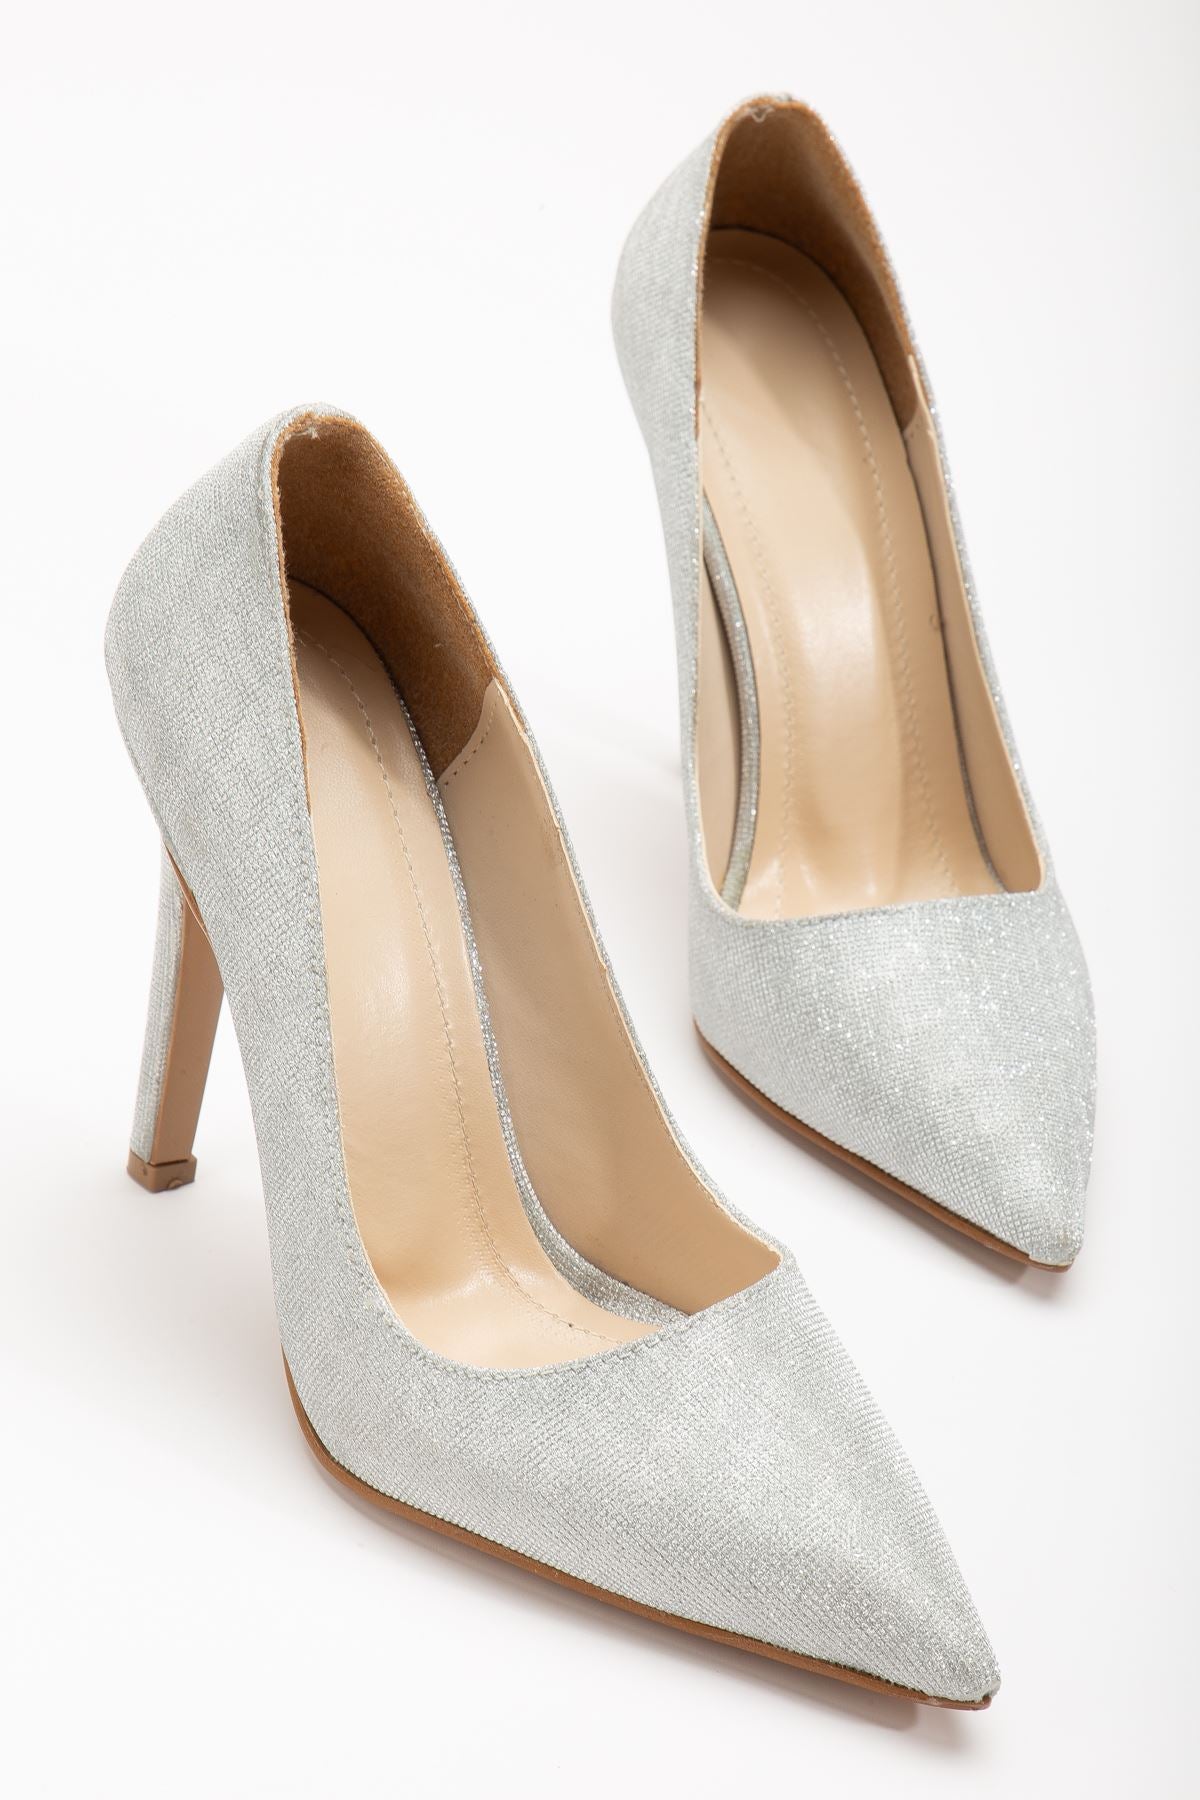 Onella Silver Glitter Pointed Low-cut Women's Heeled Shoes - STREETMODE™